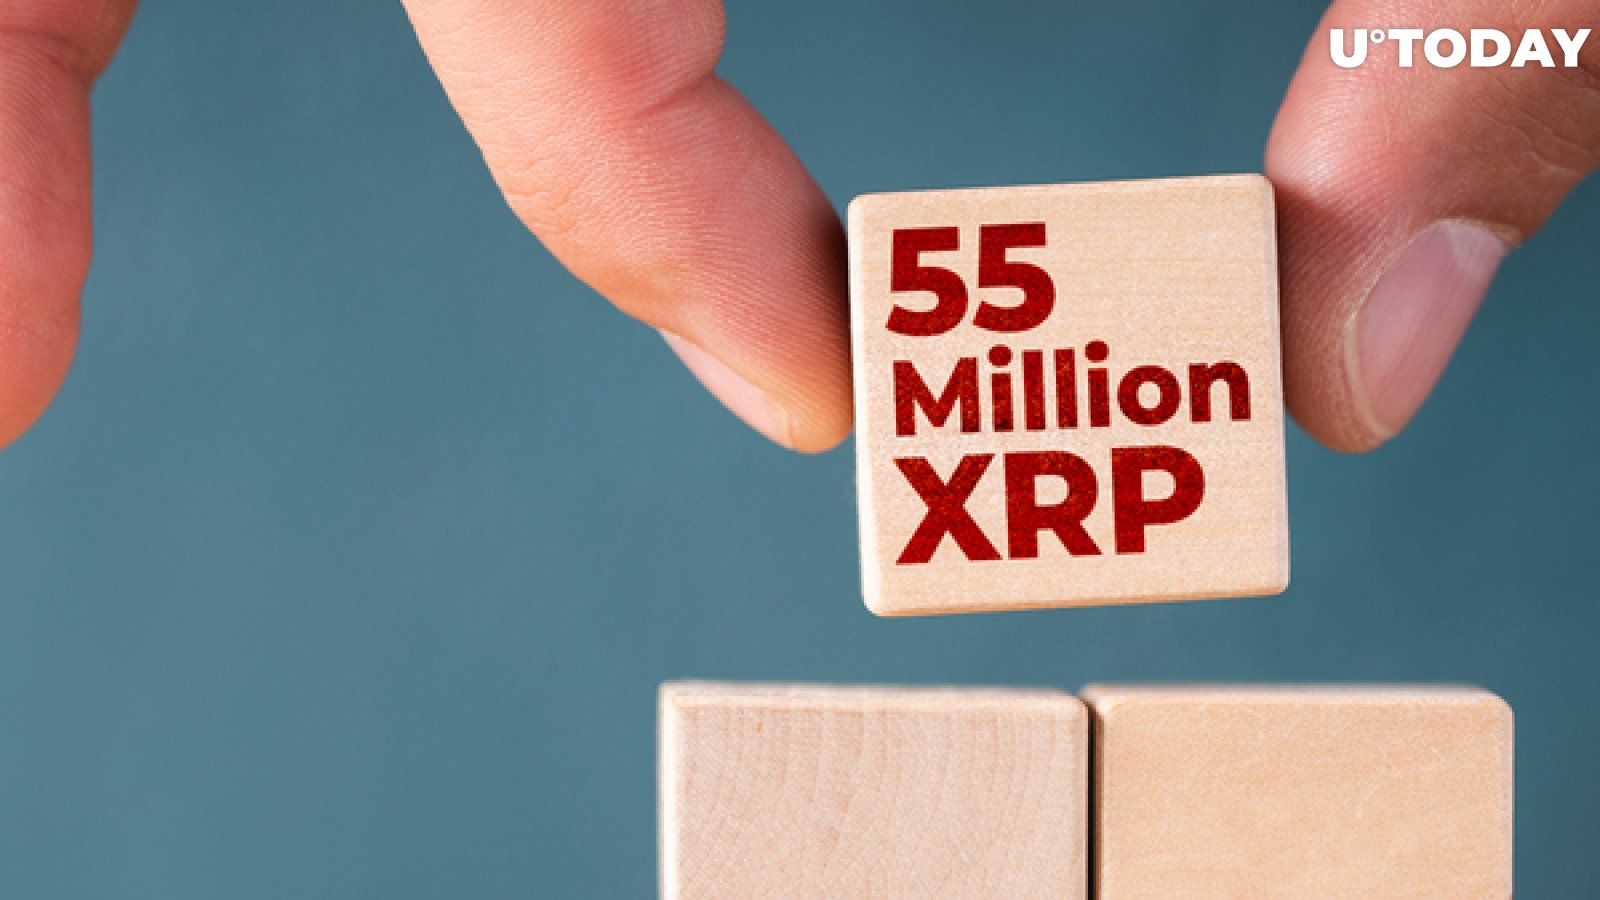 Ripple Giant Helps Shift 55 Million XRP, While Coin Remains in $0.55 Range